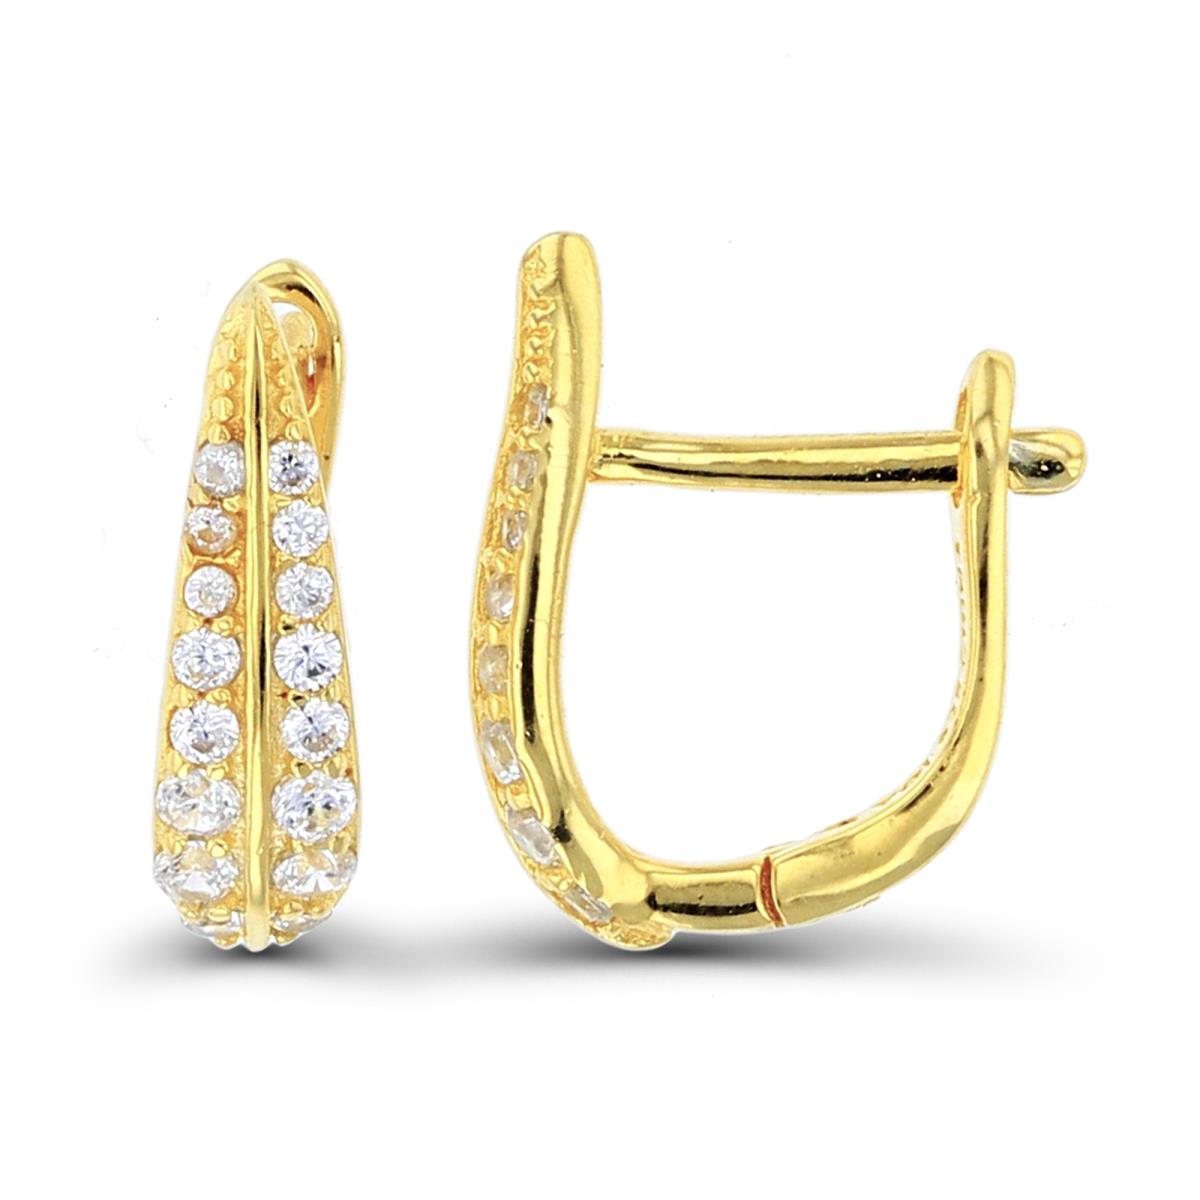 Sterling Silver+1Micron Yellow Gold Rnd White CZ Leaf Huggie Earrings with Omega Back